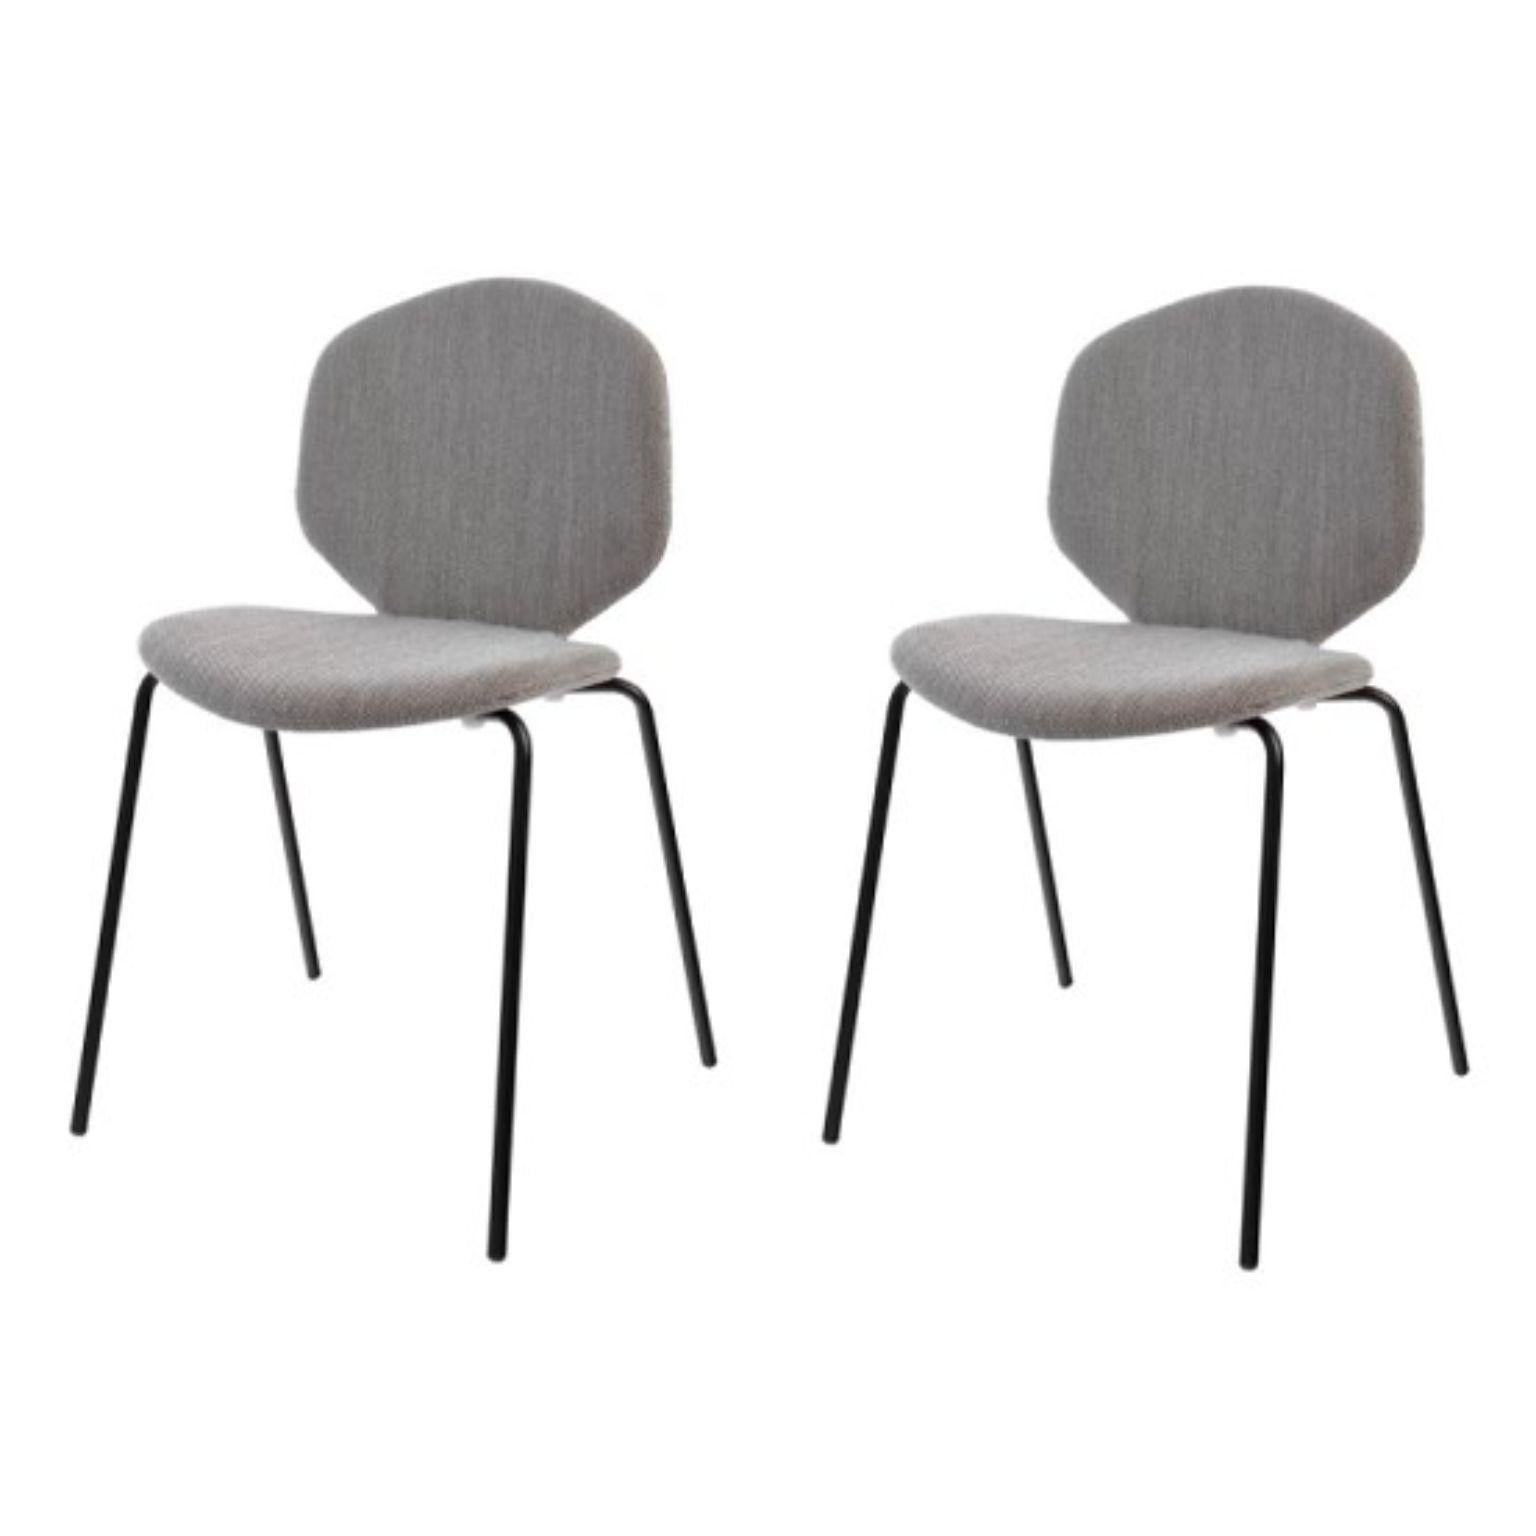 Set of 2 fabric LouLou chairs by Shin Azumi
Materials: Base in black or white or chromed lacquered metal, seat and back in natural oak veneer or black or white stained. Upholstered seat and backrest covered with fabric on polyurethane